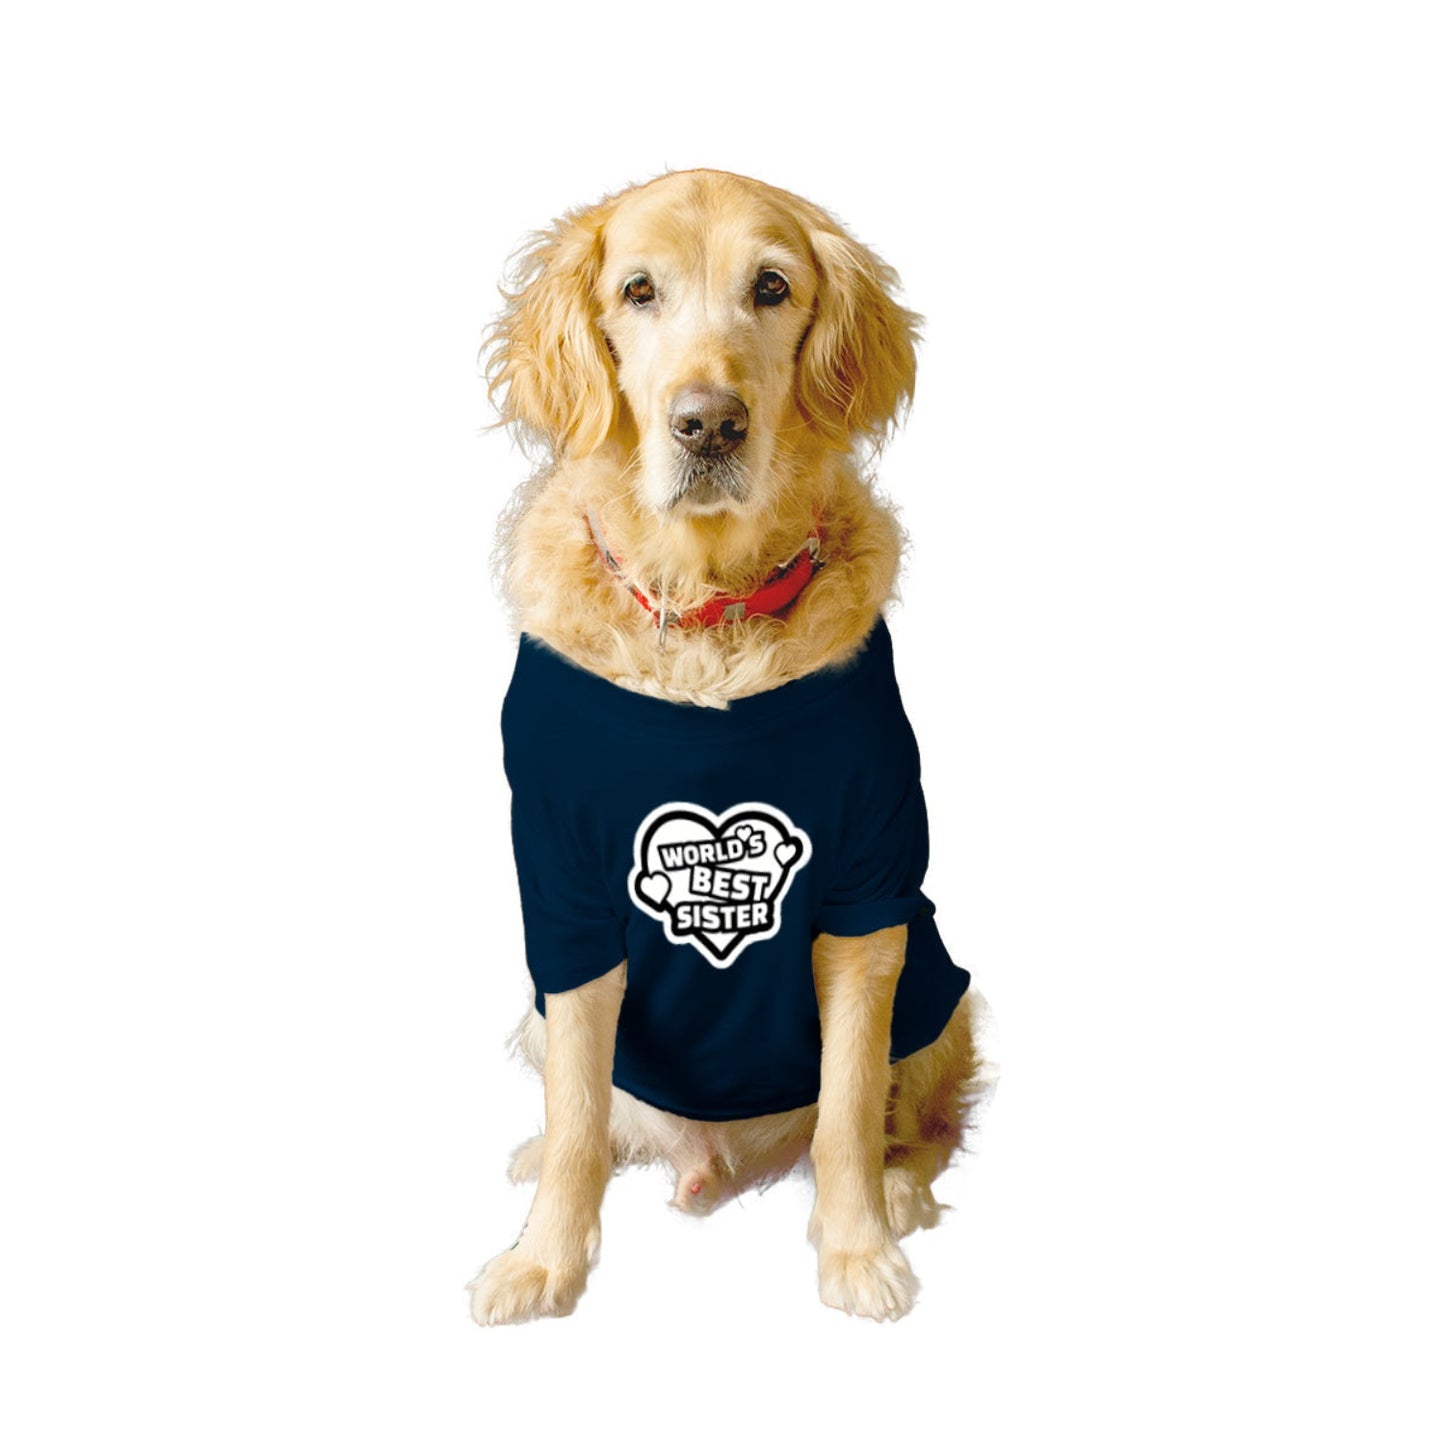 Ruse XX-Small (Chihuahuas, Papillons) / Navy Ruse Basic Crew Neck "World's Best Sister" Printed Half Sleeves Dog Tee